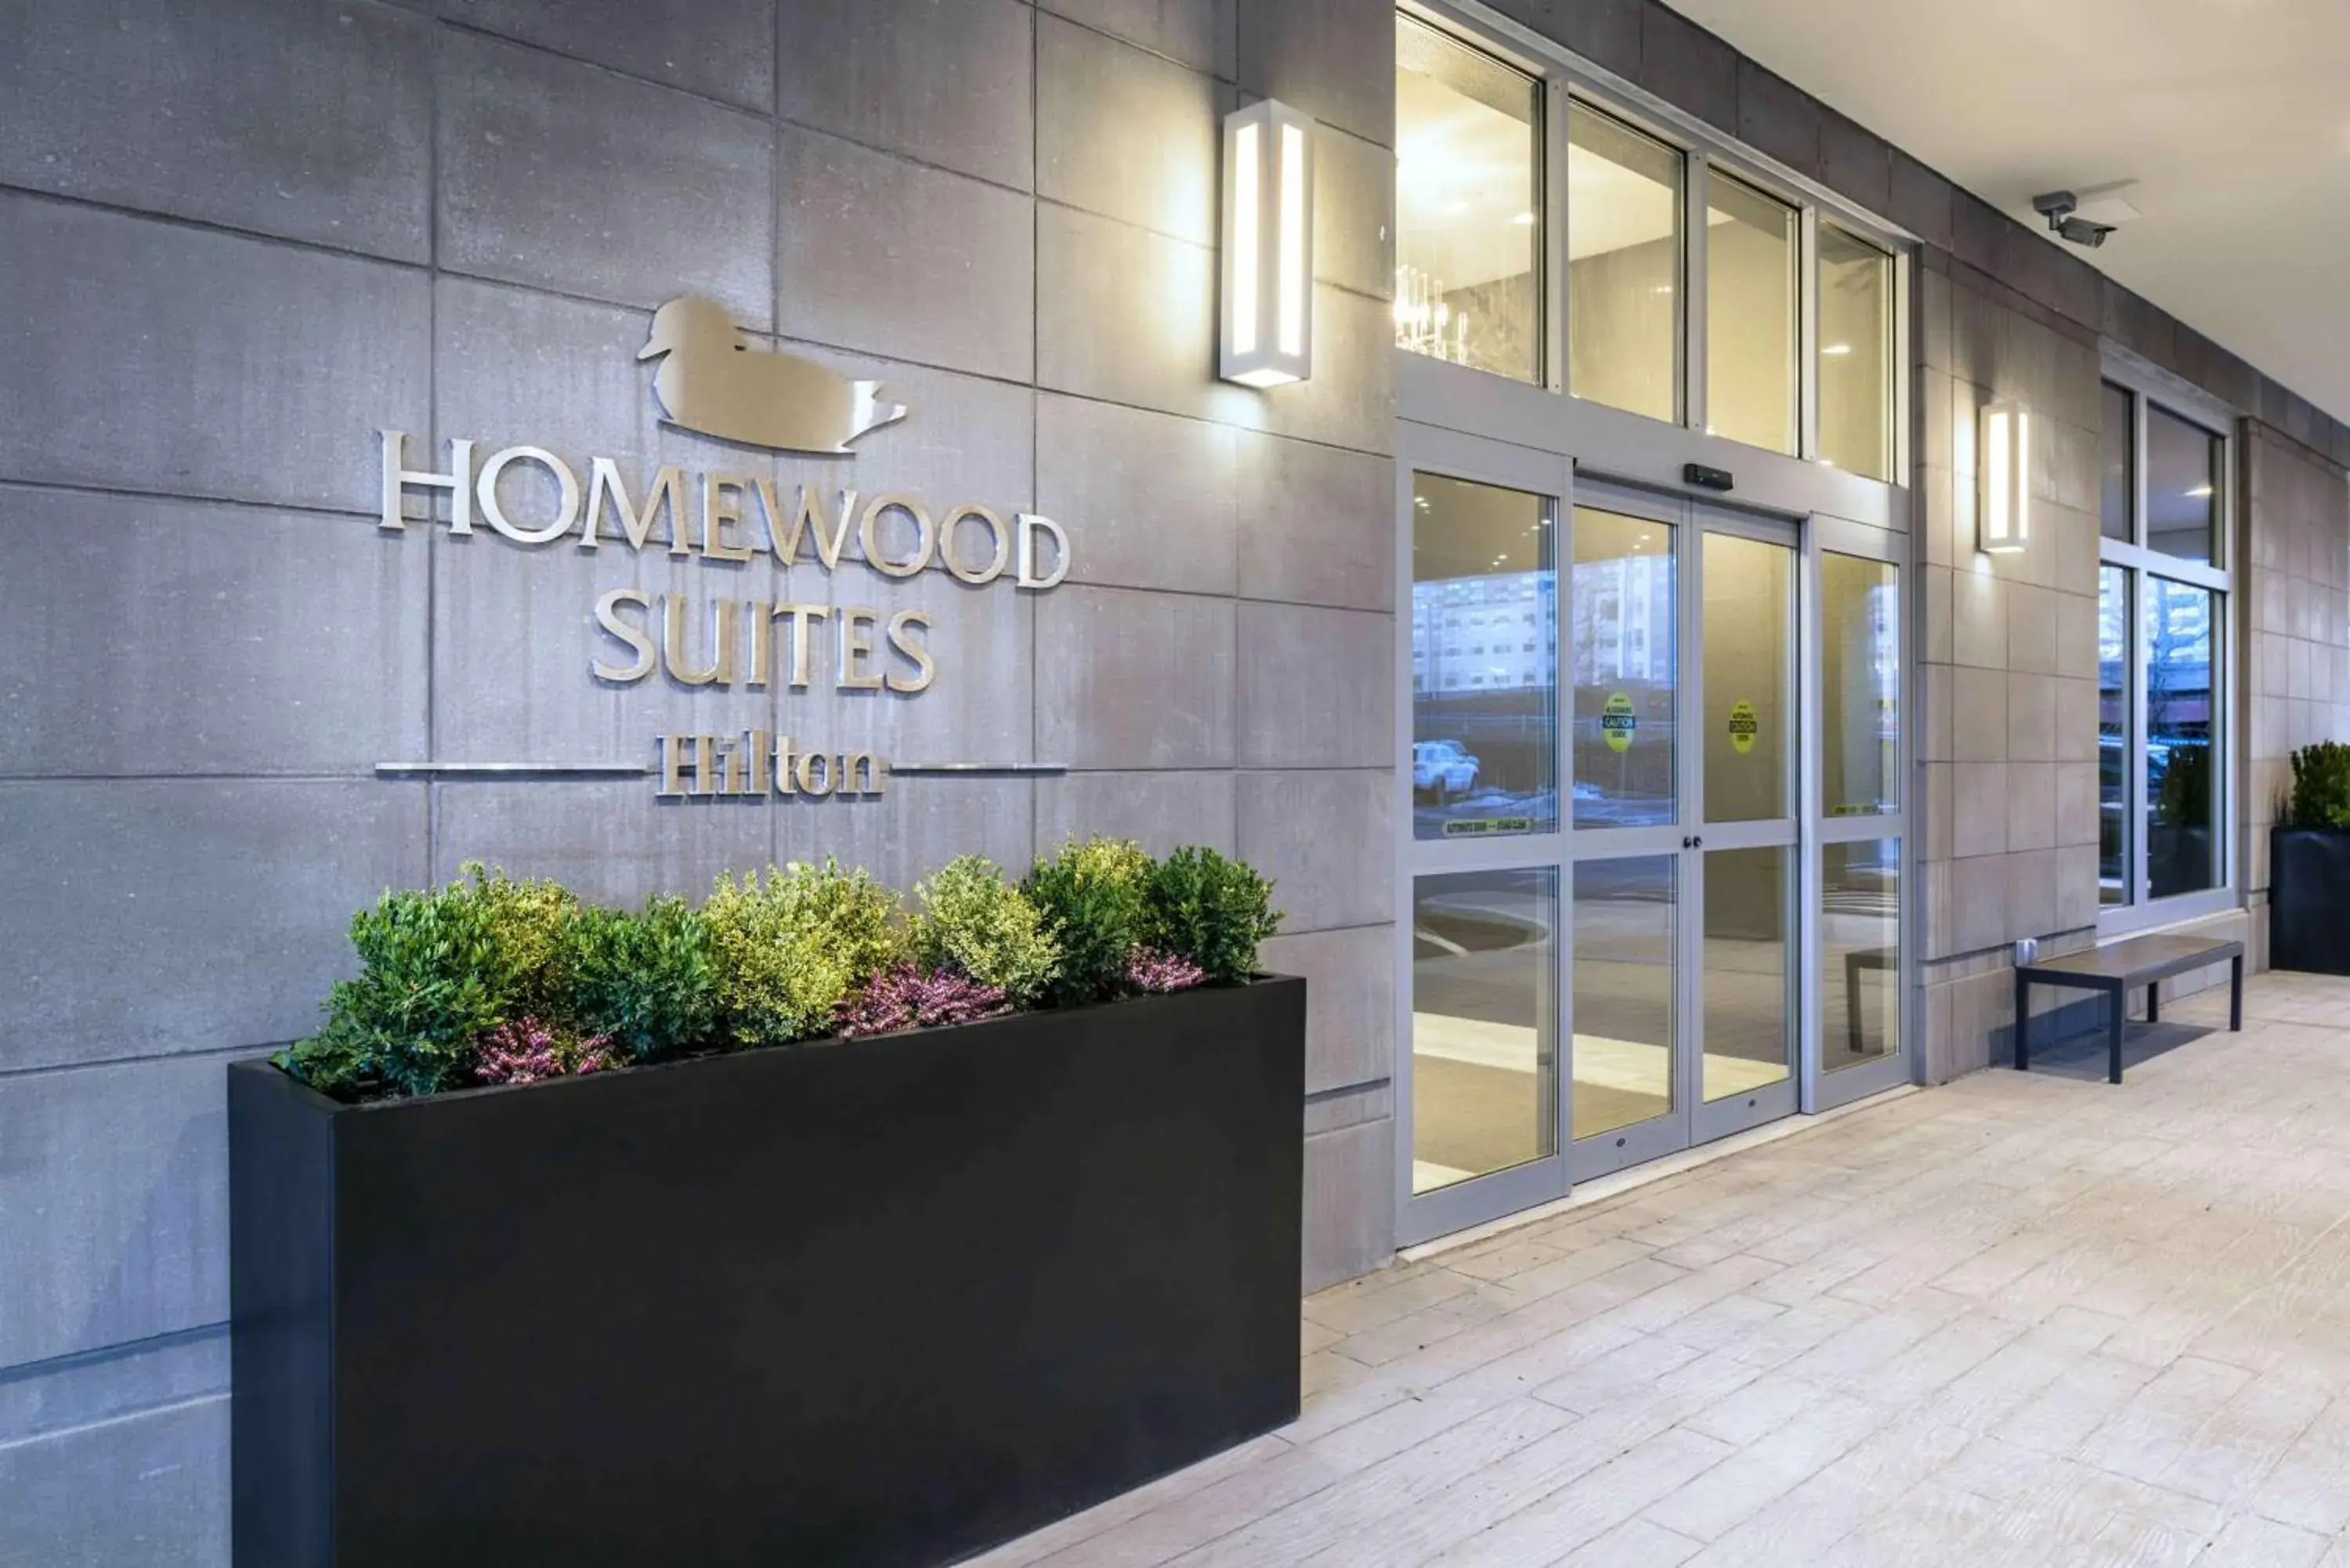 Property building in Homewood Suites By Hilton Boston Logan Airport Chelsea